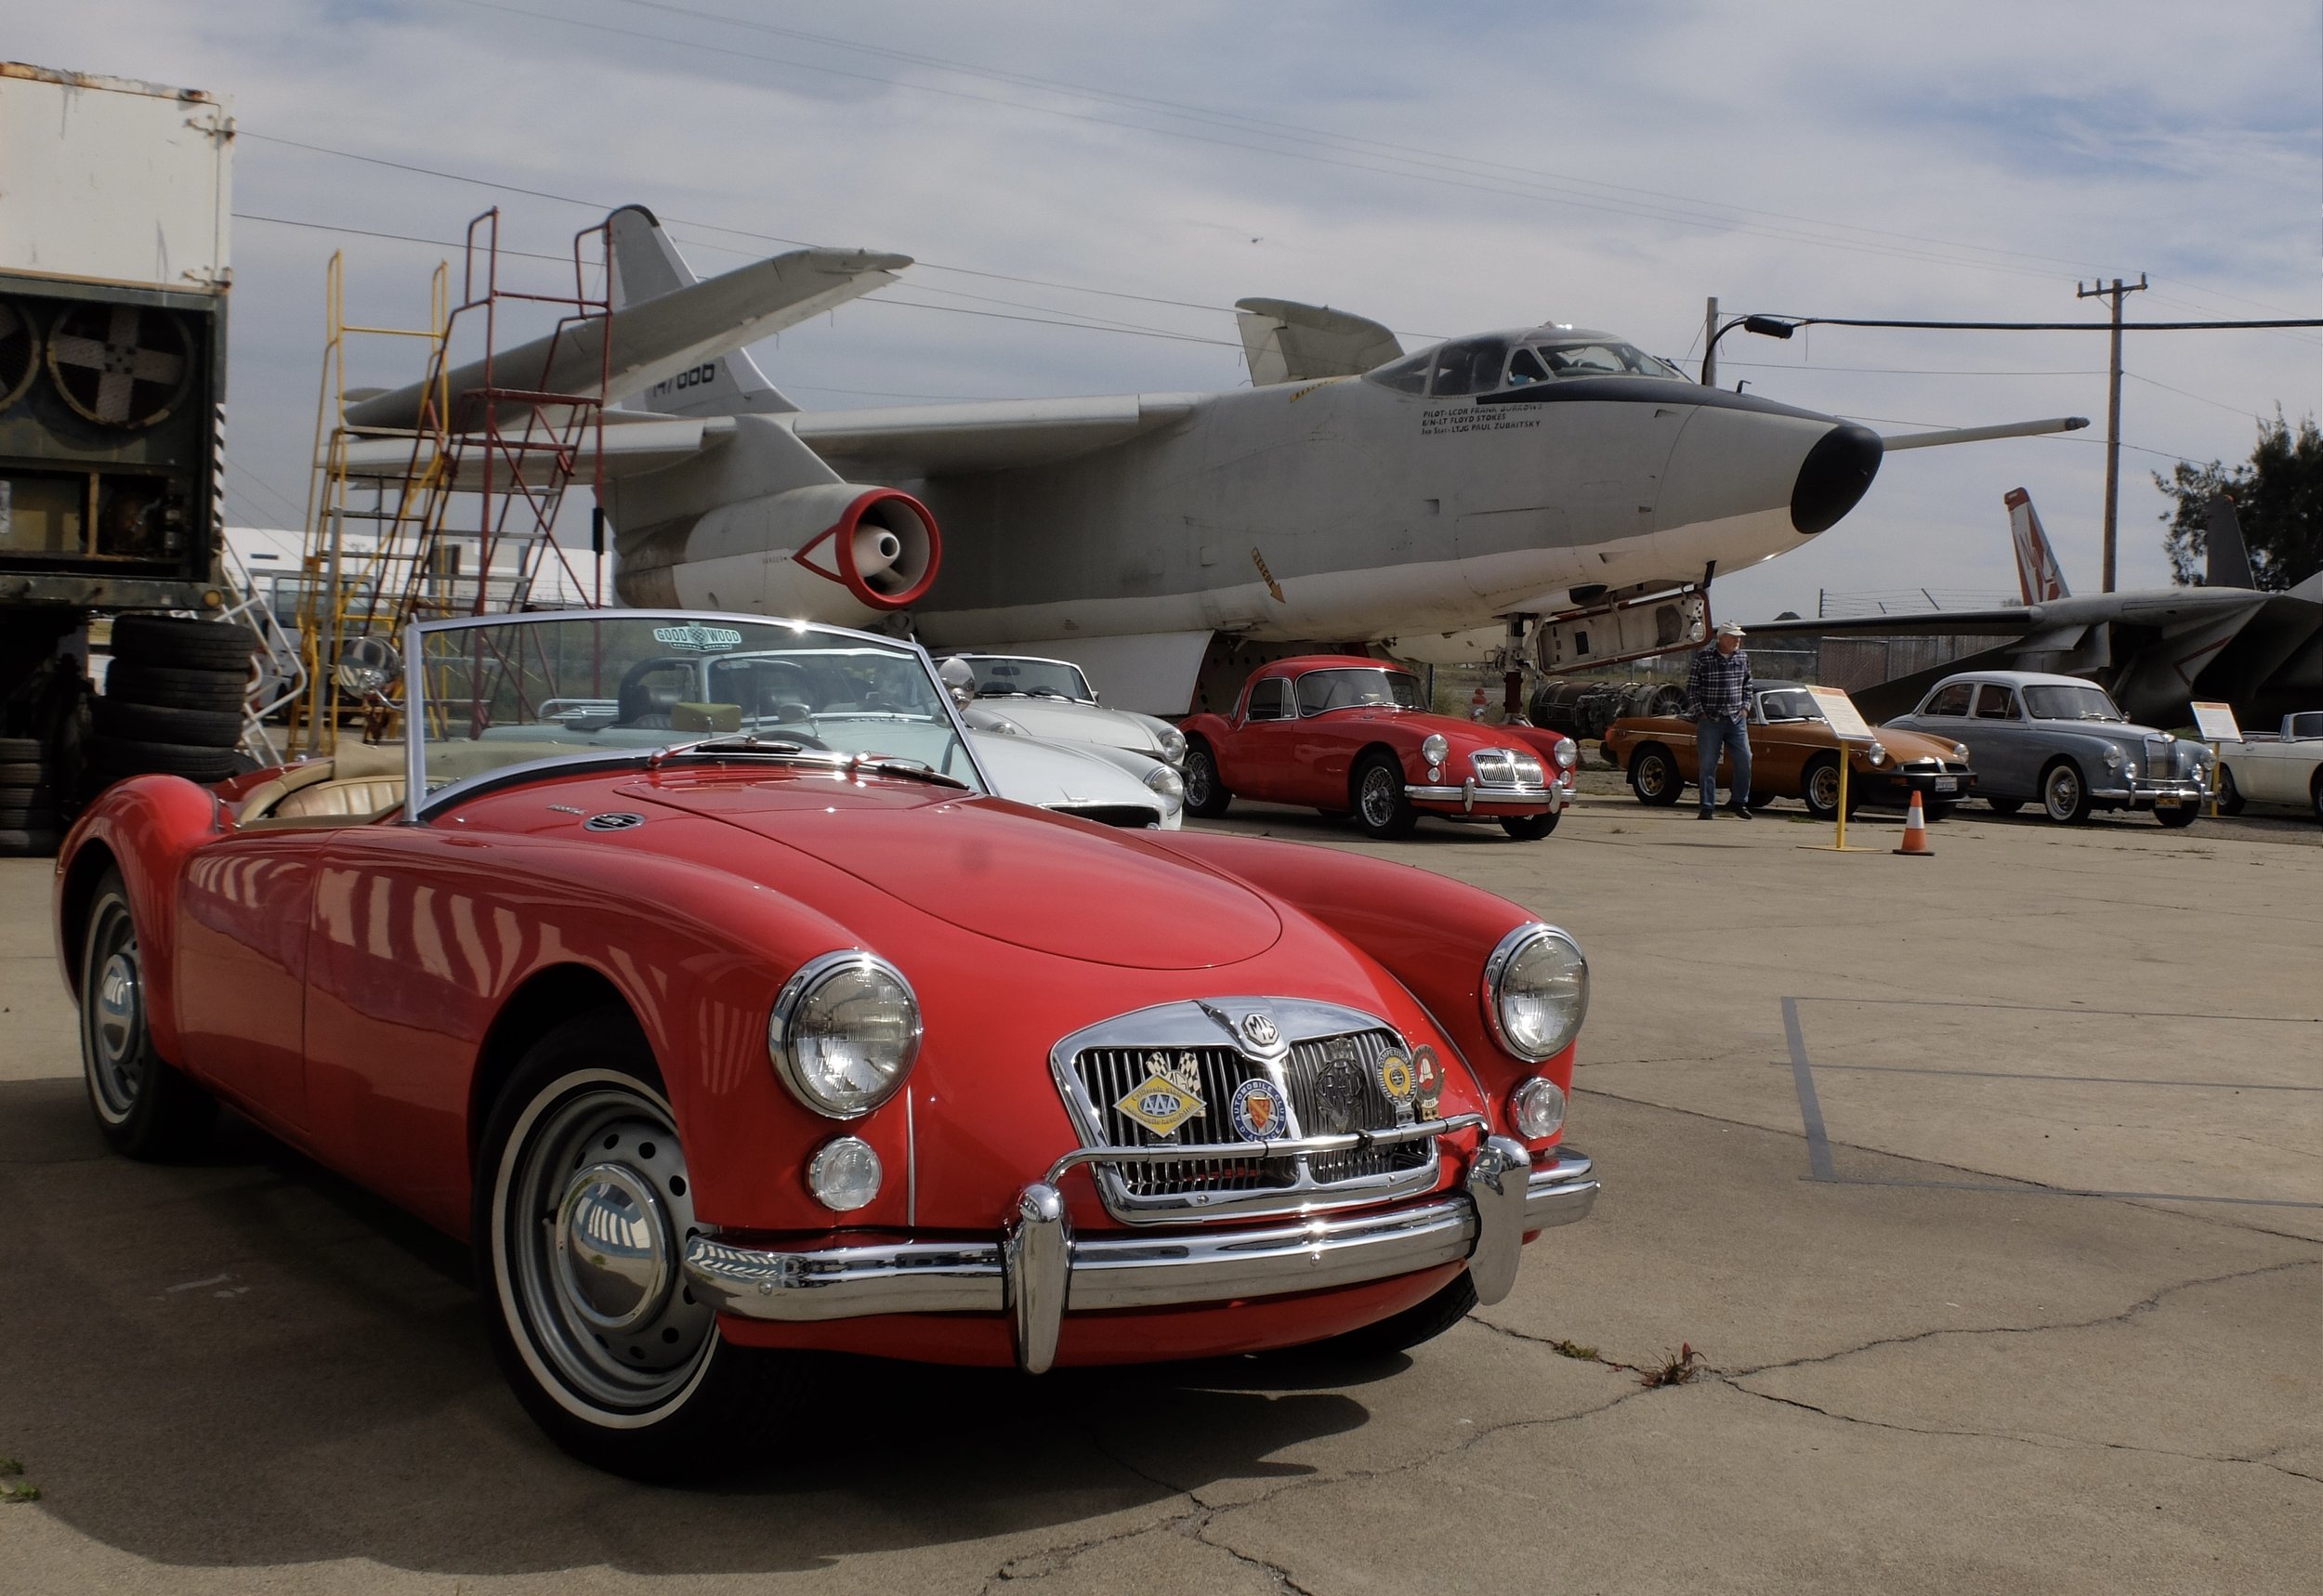 Coming soon, a MG Owners Club visit to the Oakland Aviation Museum &amp; Indiana Jone's' ride in a huge flying boat.